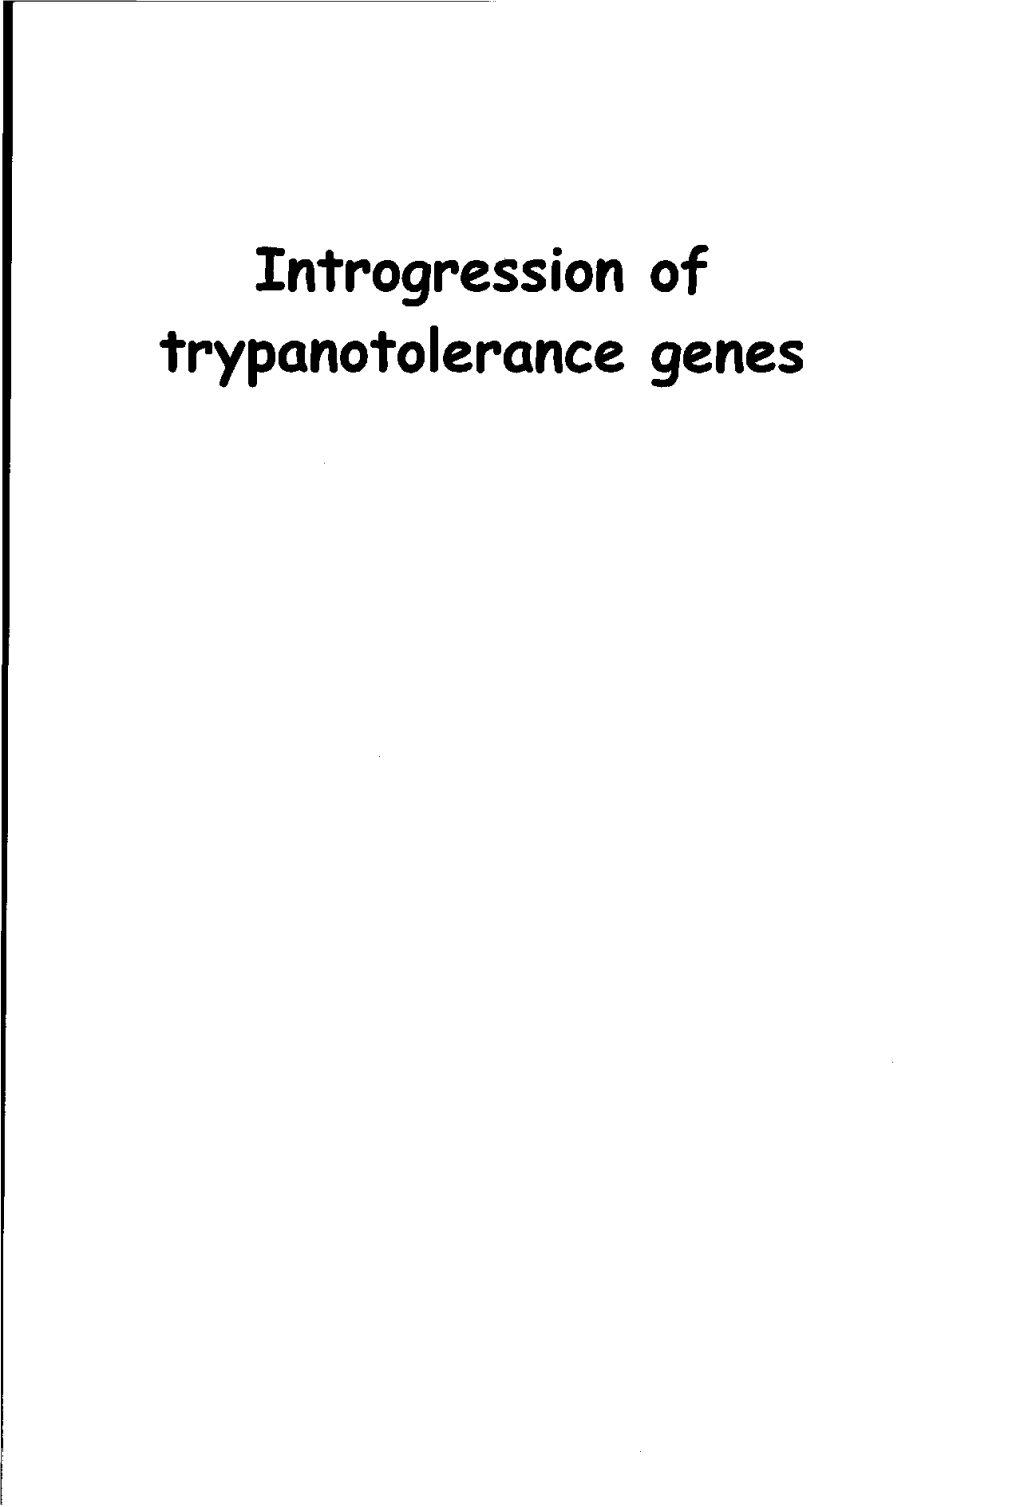 Introgression of Trypanotolerance Genes Promoter: Dr